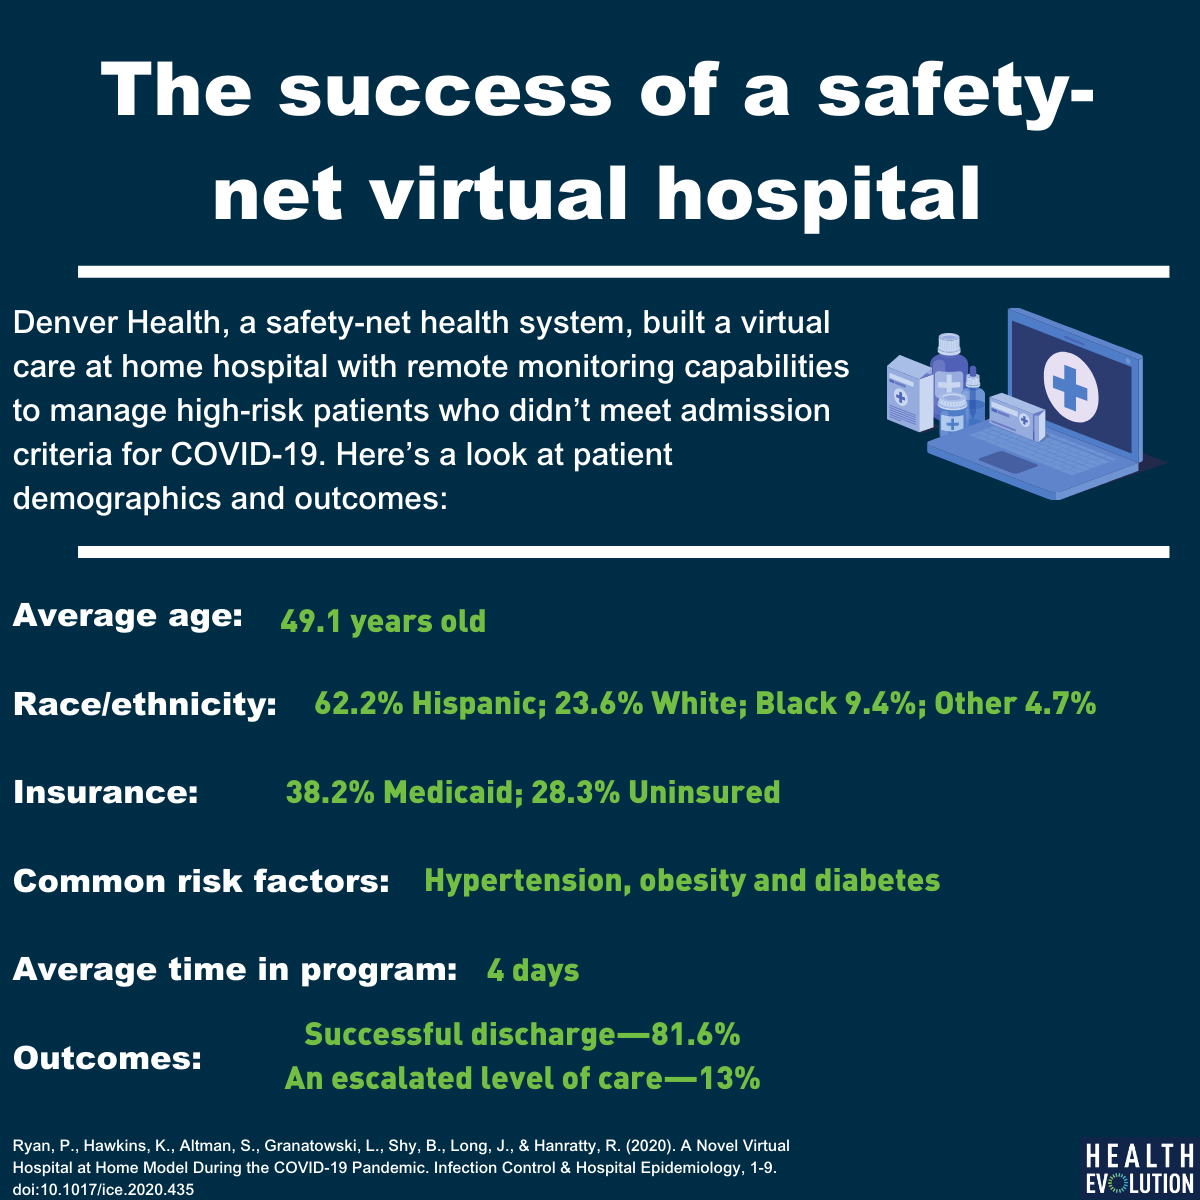 How a safety-net provider successfully implemented a virtual hospital